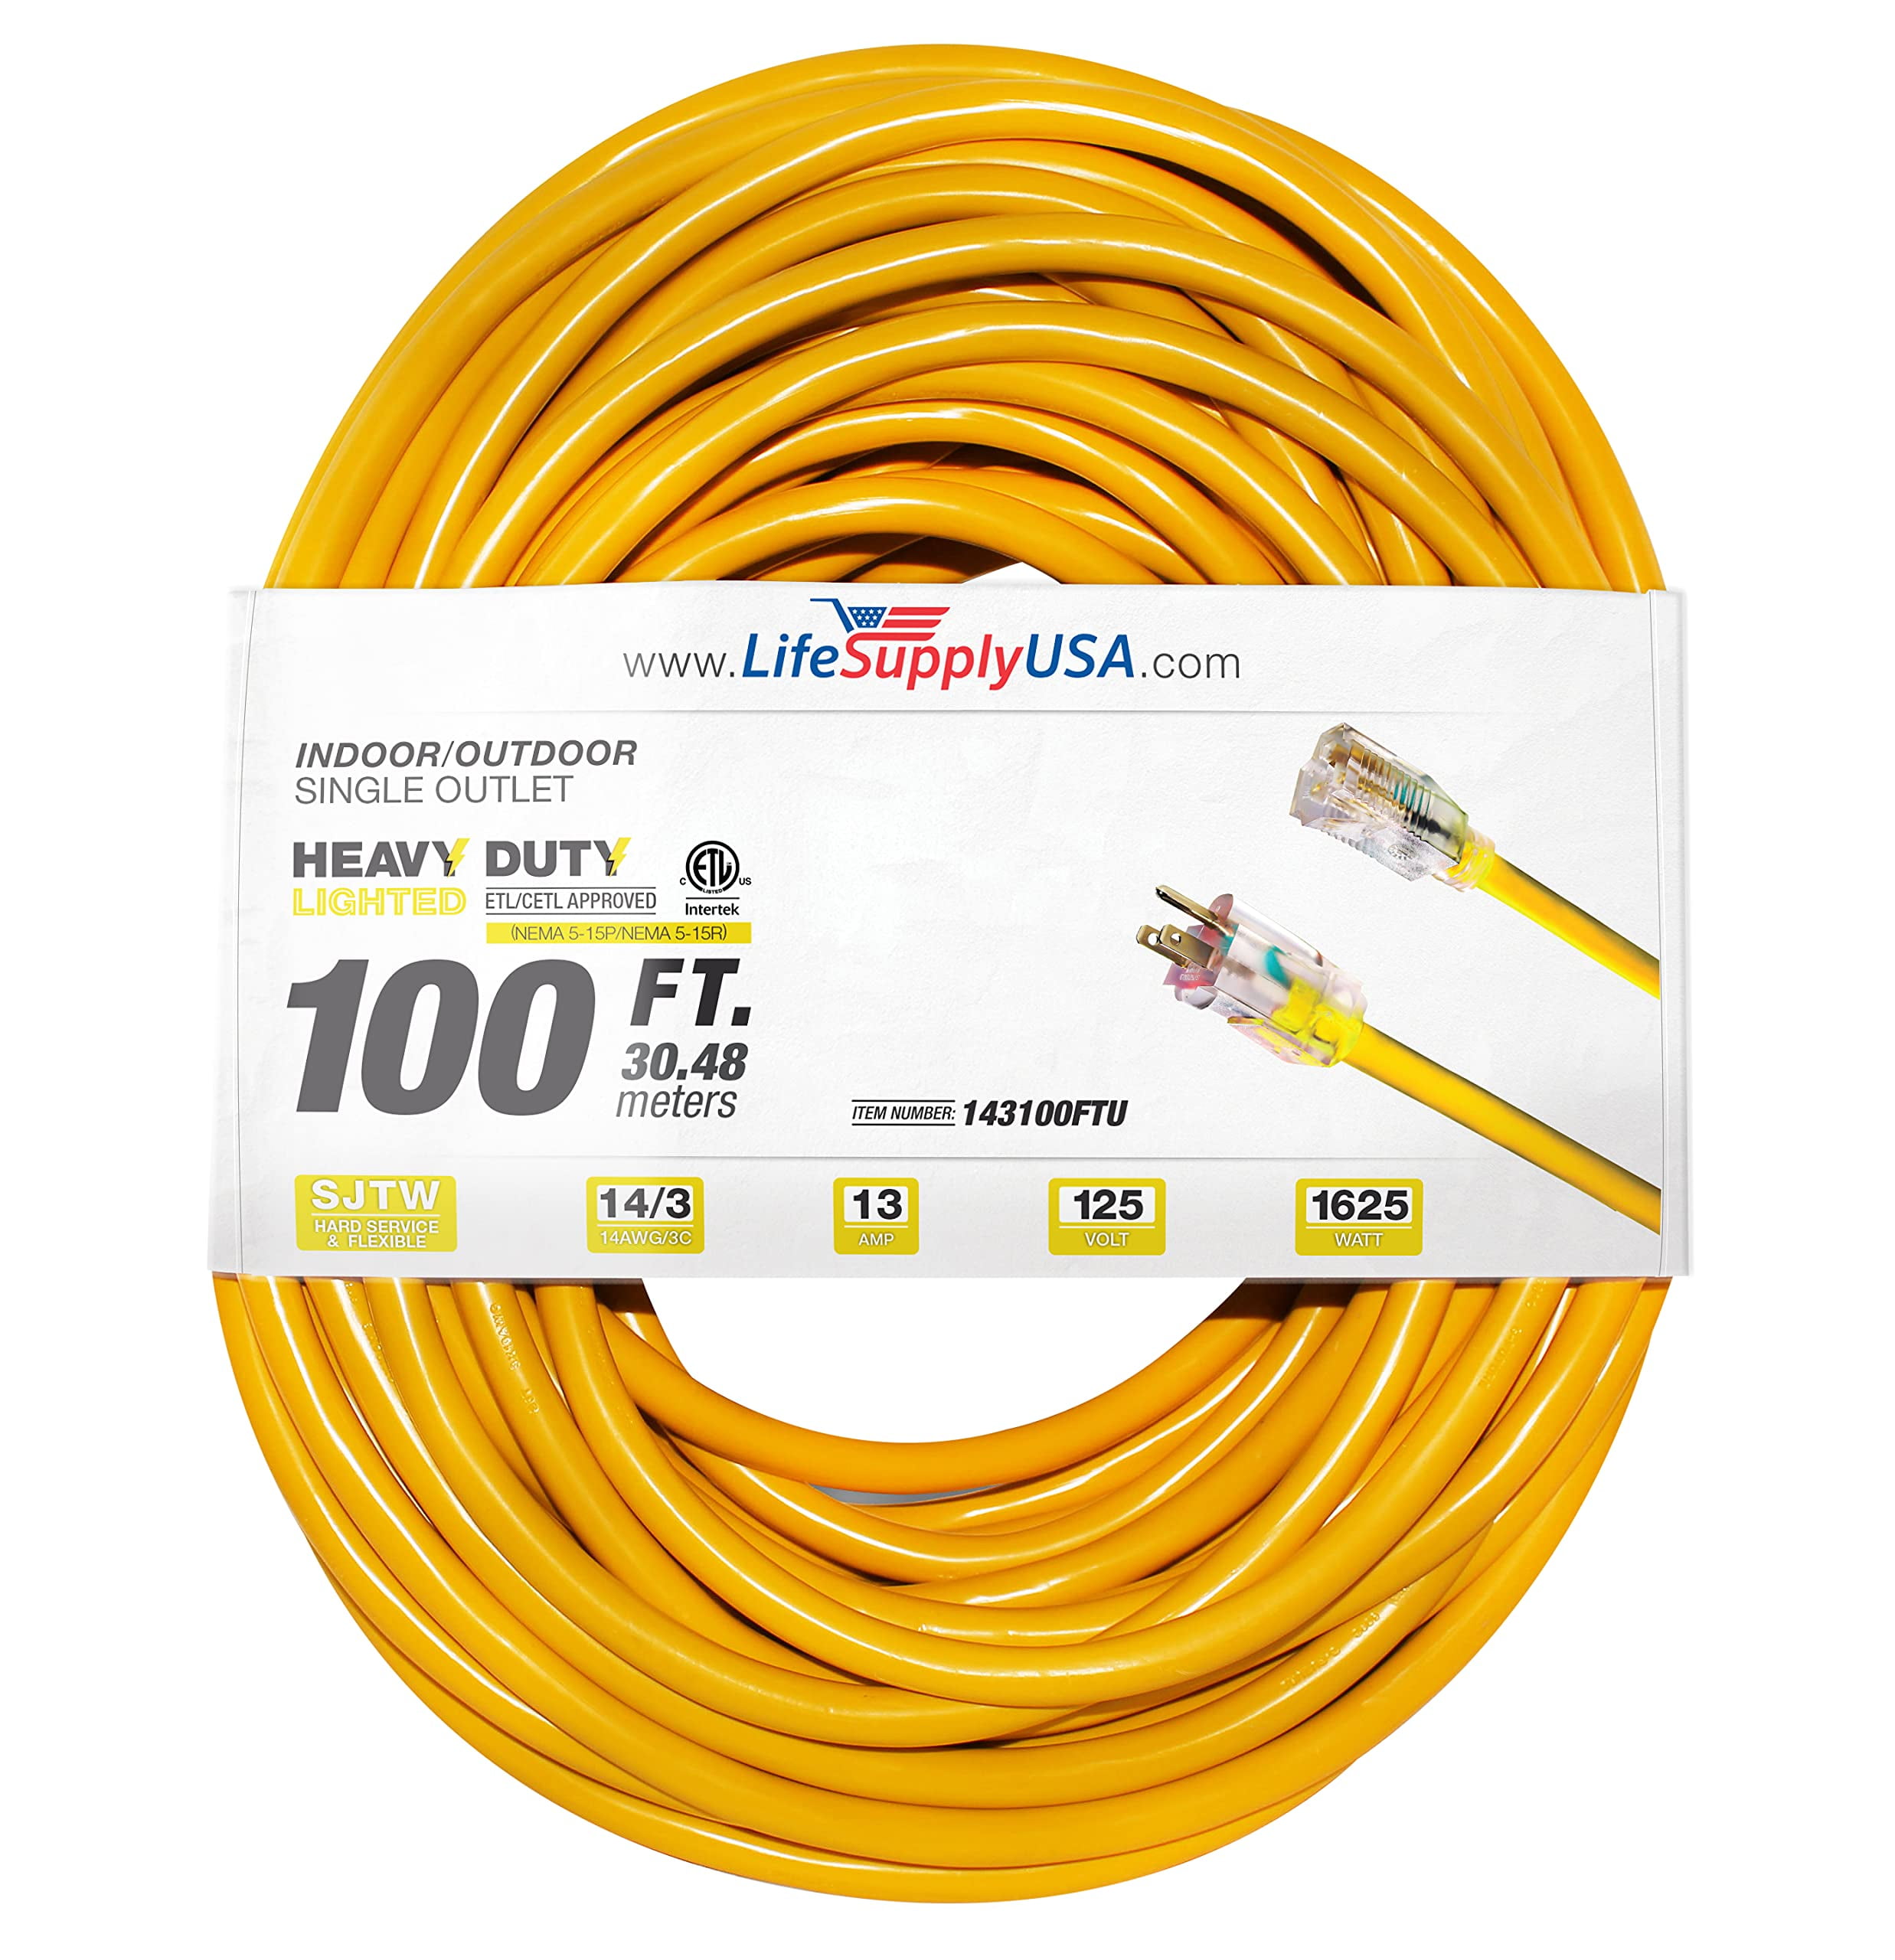 100 ft Power Extension Cord Outdoor  Indoor Heavy Duty 14 gauge/3 prong  SJTW (Yellow) Lighted end Extra Durability 13 AMP 125 Volts 1625 Watts ETL  listed by LifeSupplyUSA